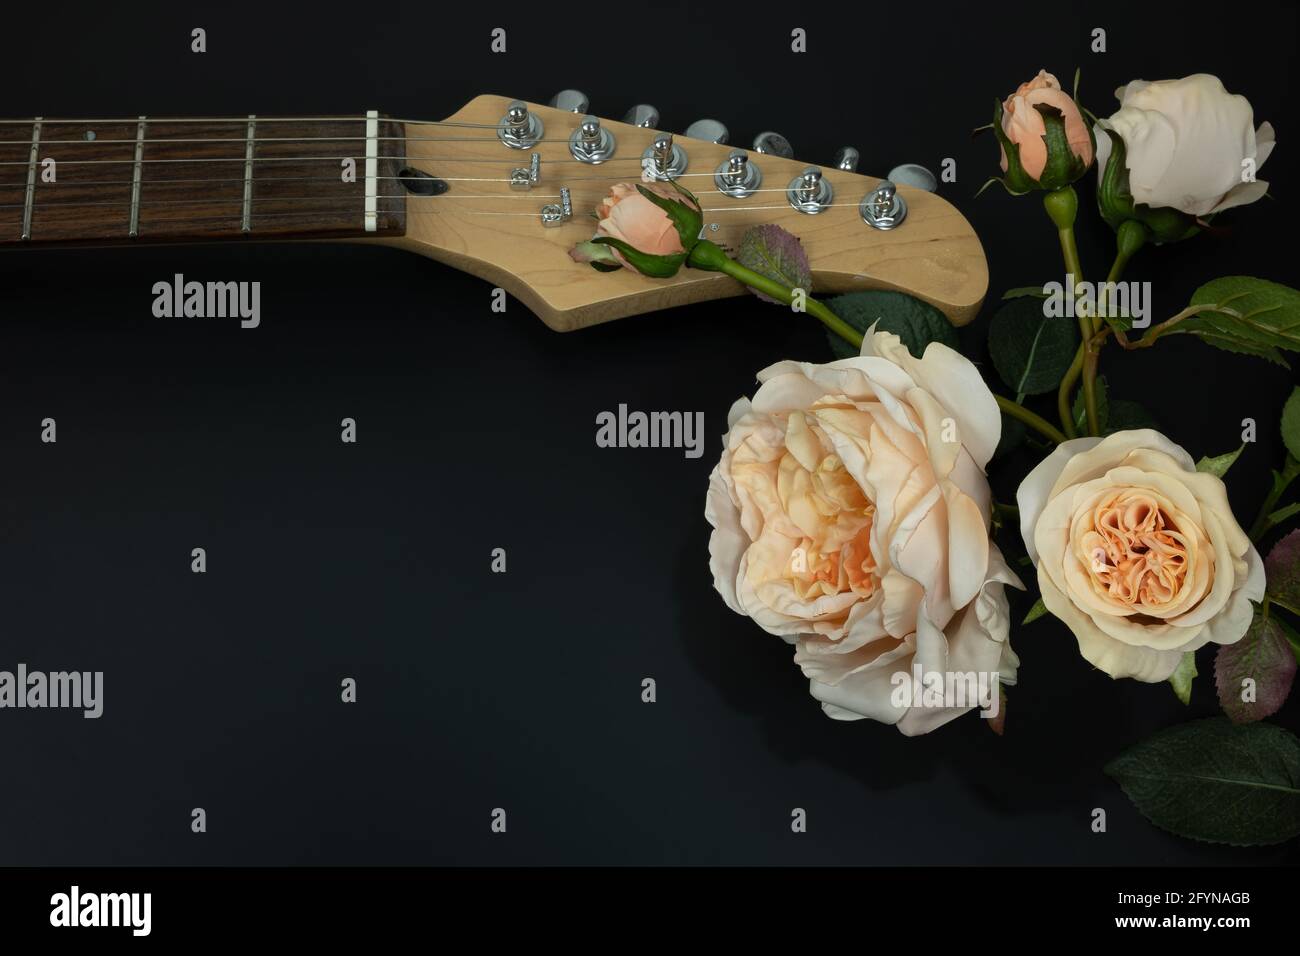 Red Roses Instrumental High Resolution Stock Photography and Images - Alamy